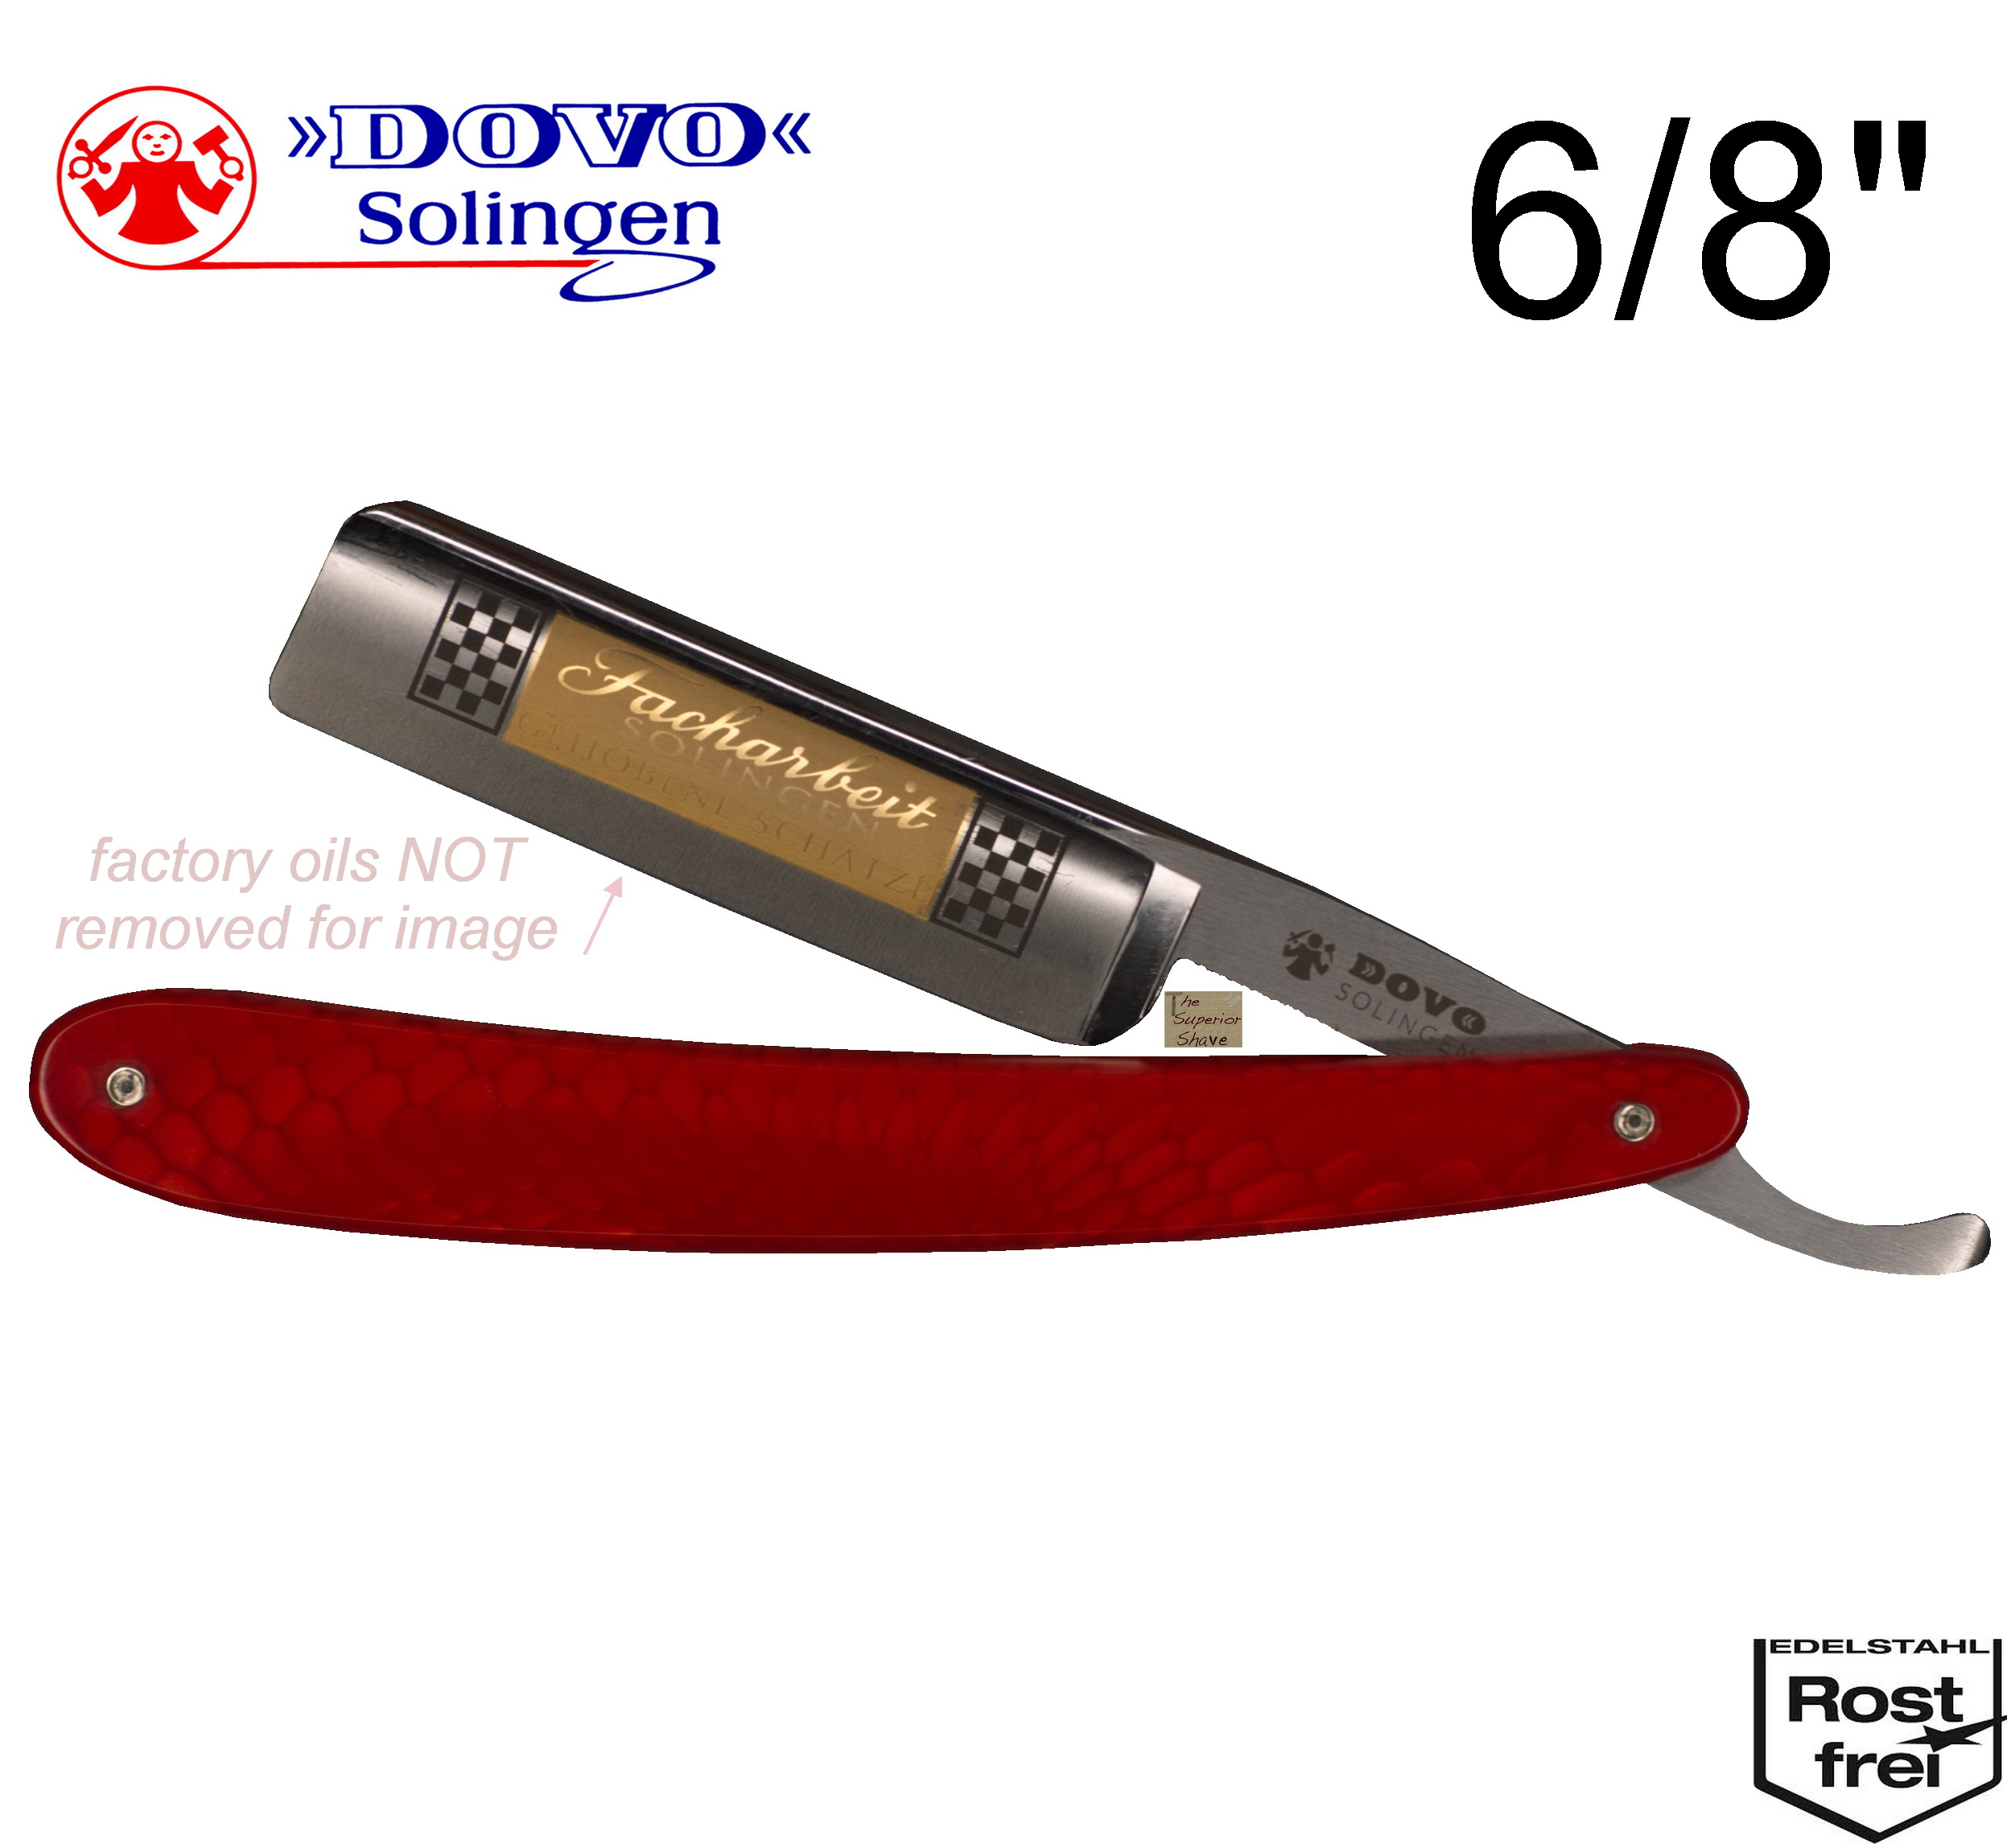 Dovo Facharbeit Steel 136813315 | Acrylic 1967-1971 Germany Made Handle, Look | Reptile Size in | Hollow Point | 6/8 | | HISTORIC Straight Red Ground Stainless German Square Razor | Full